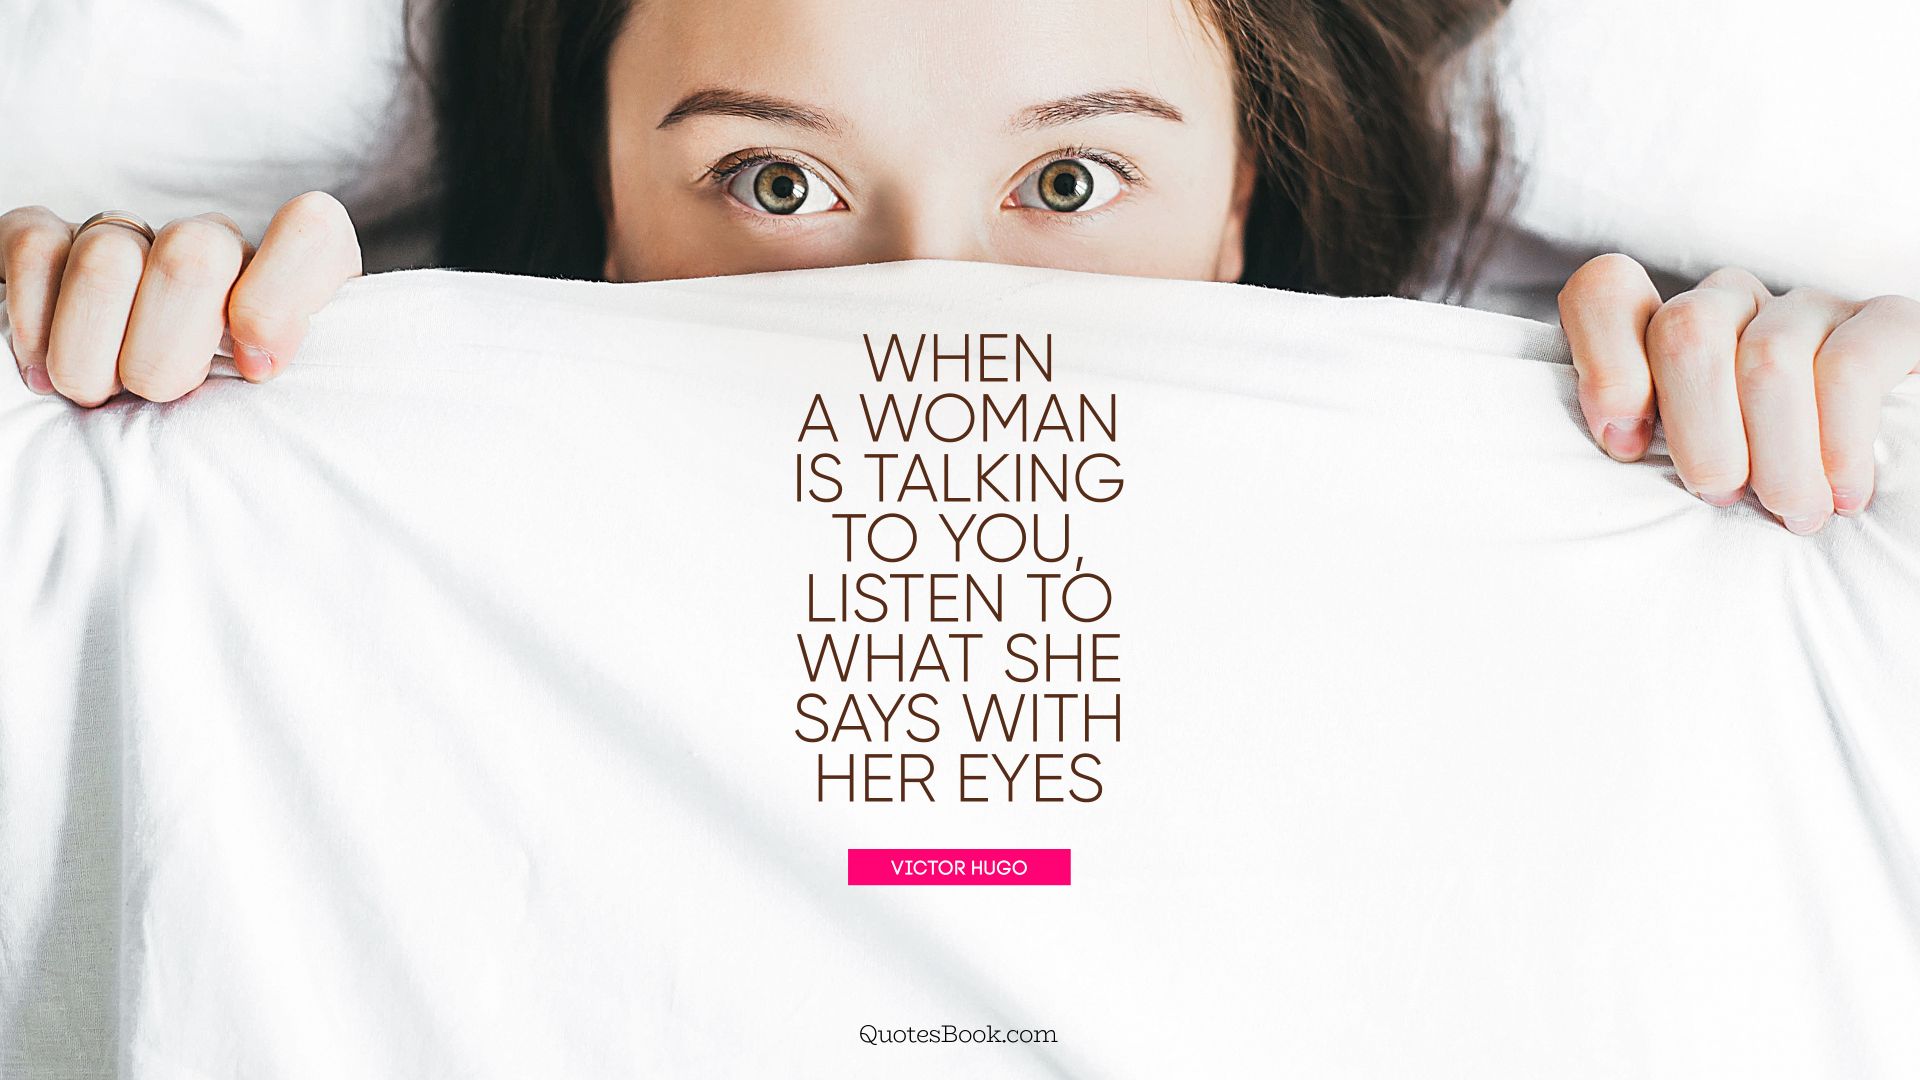 When a woman is talking to you, listen to what she says with her eyes. - Quote by Victor Hugo